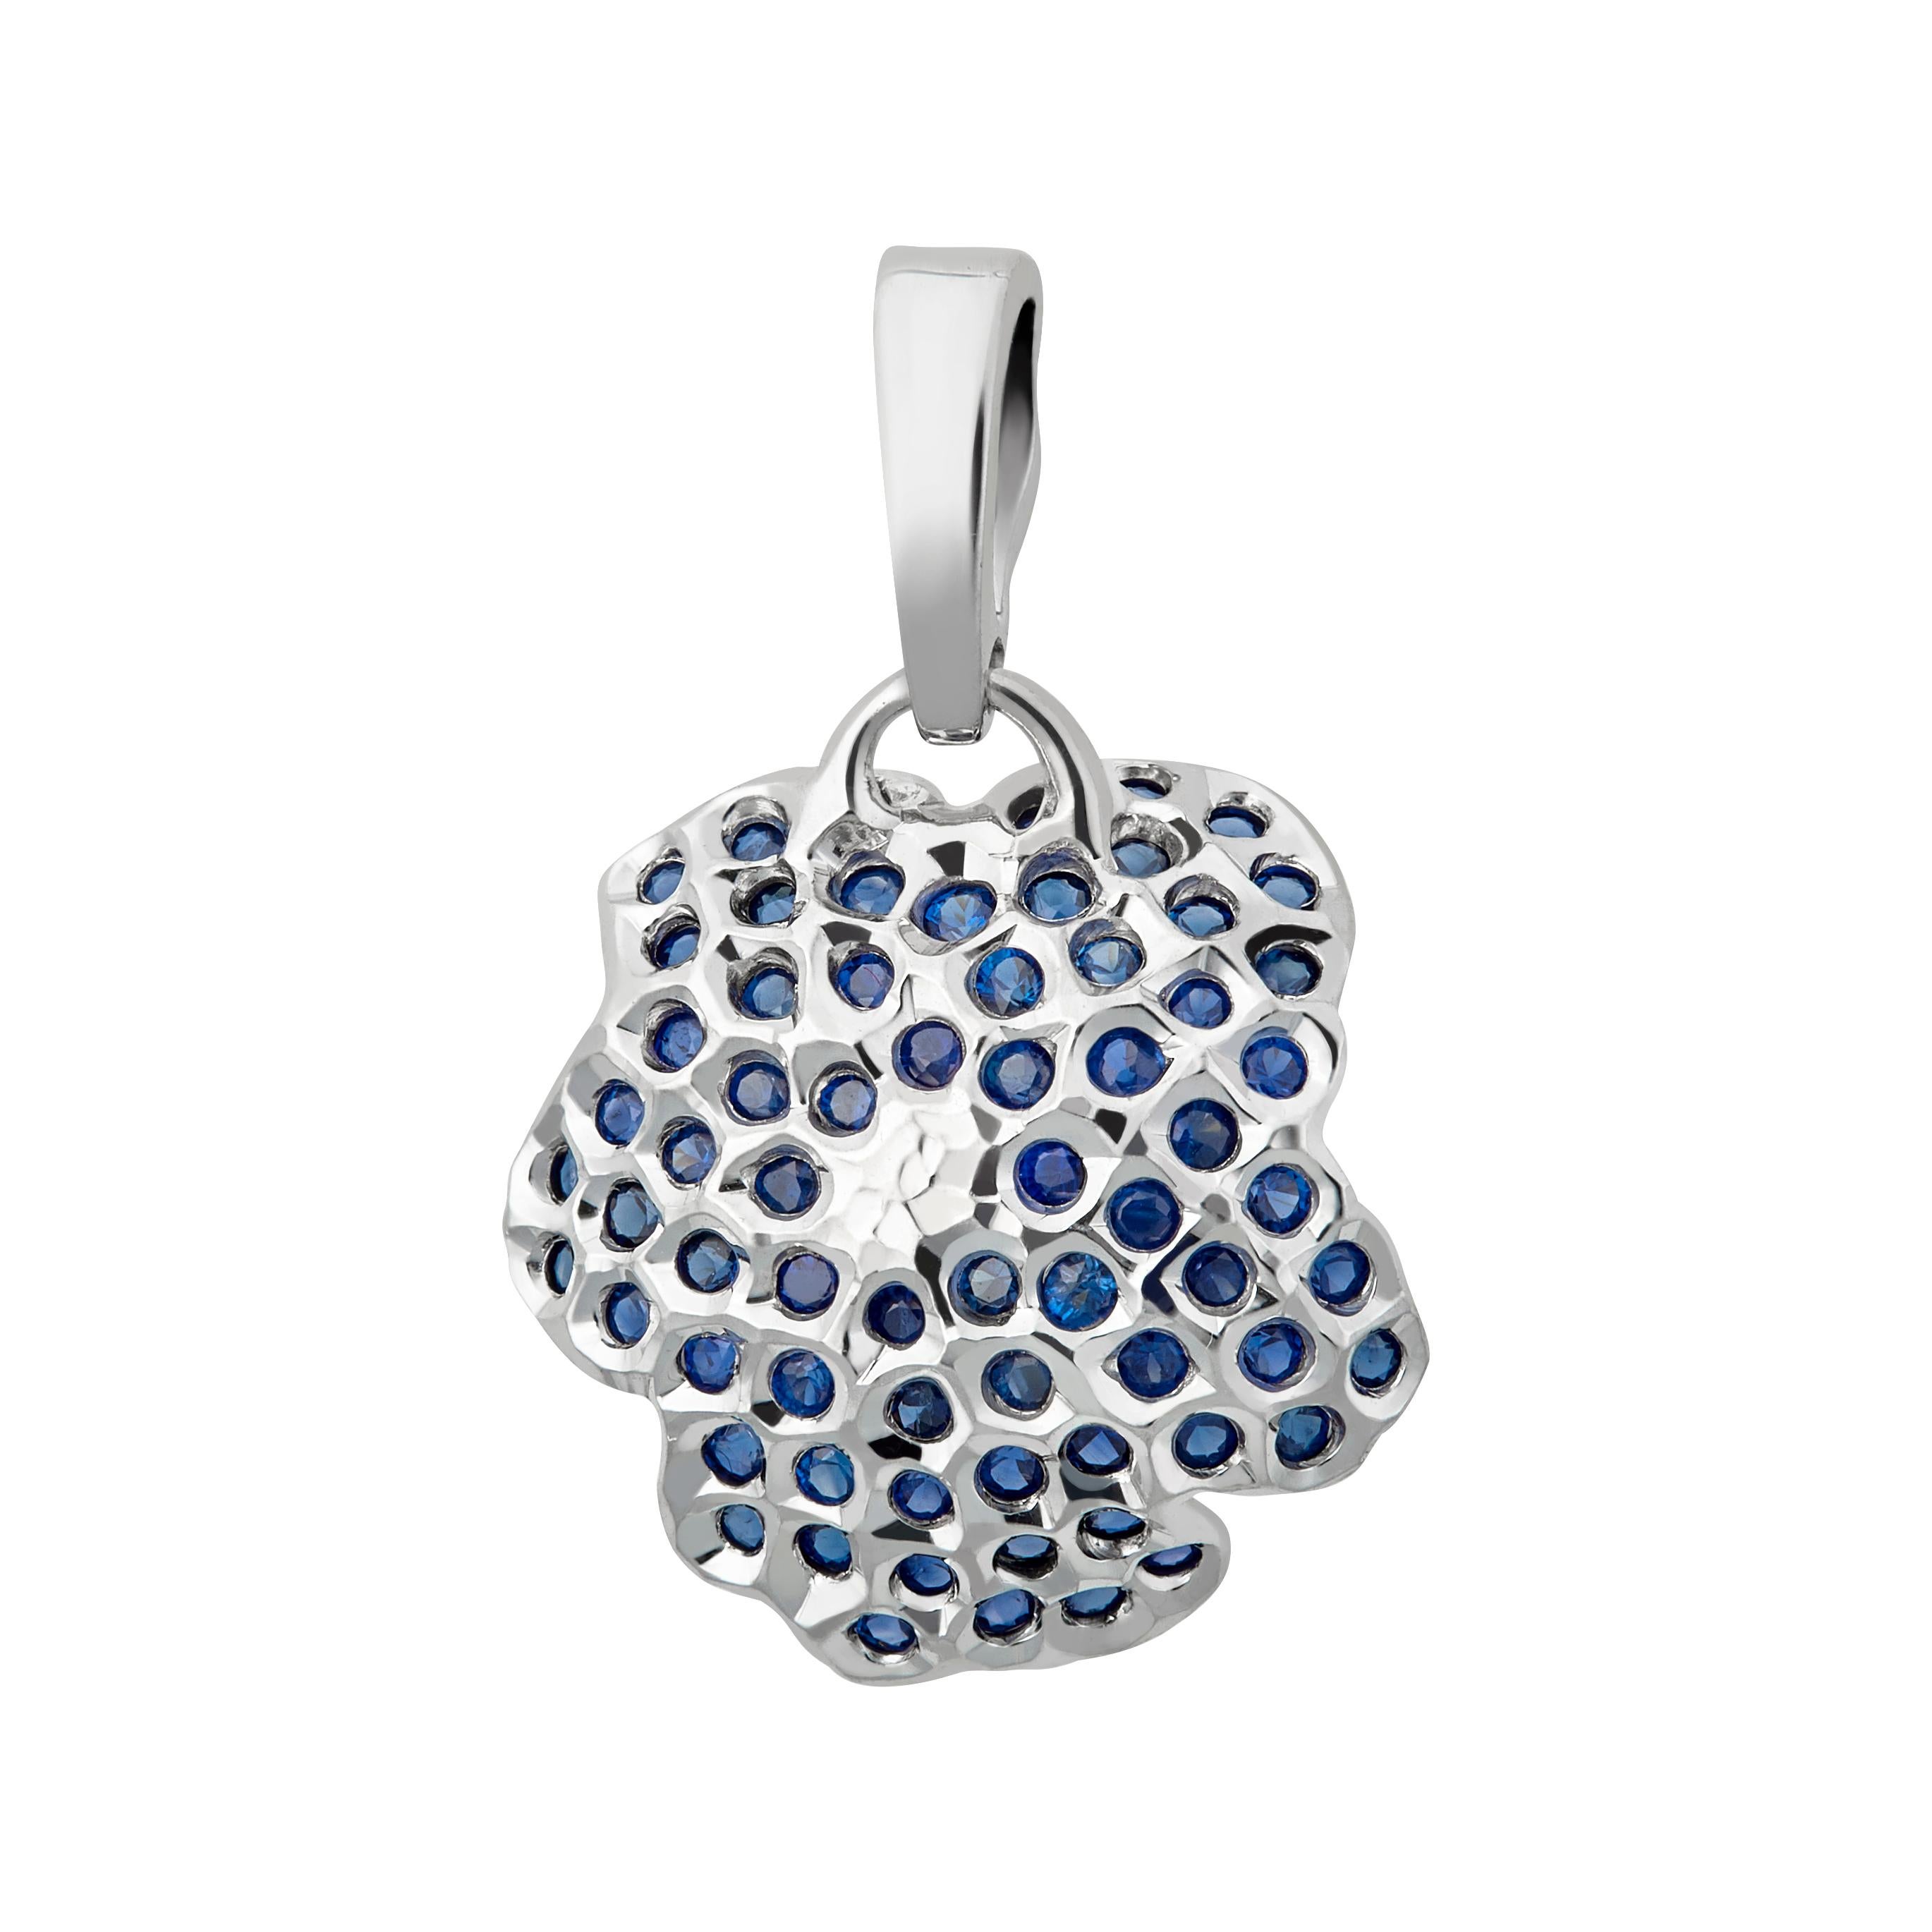 A floral pendant consisting of 18K white gold, blue sapphires and 0.32ct diamond presents you elegantly and charmingly. Diamond slightly show blue tint due to the unique shinning effect from reversely mounted sapphires. An interesting reflection of